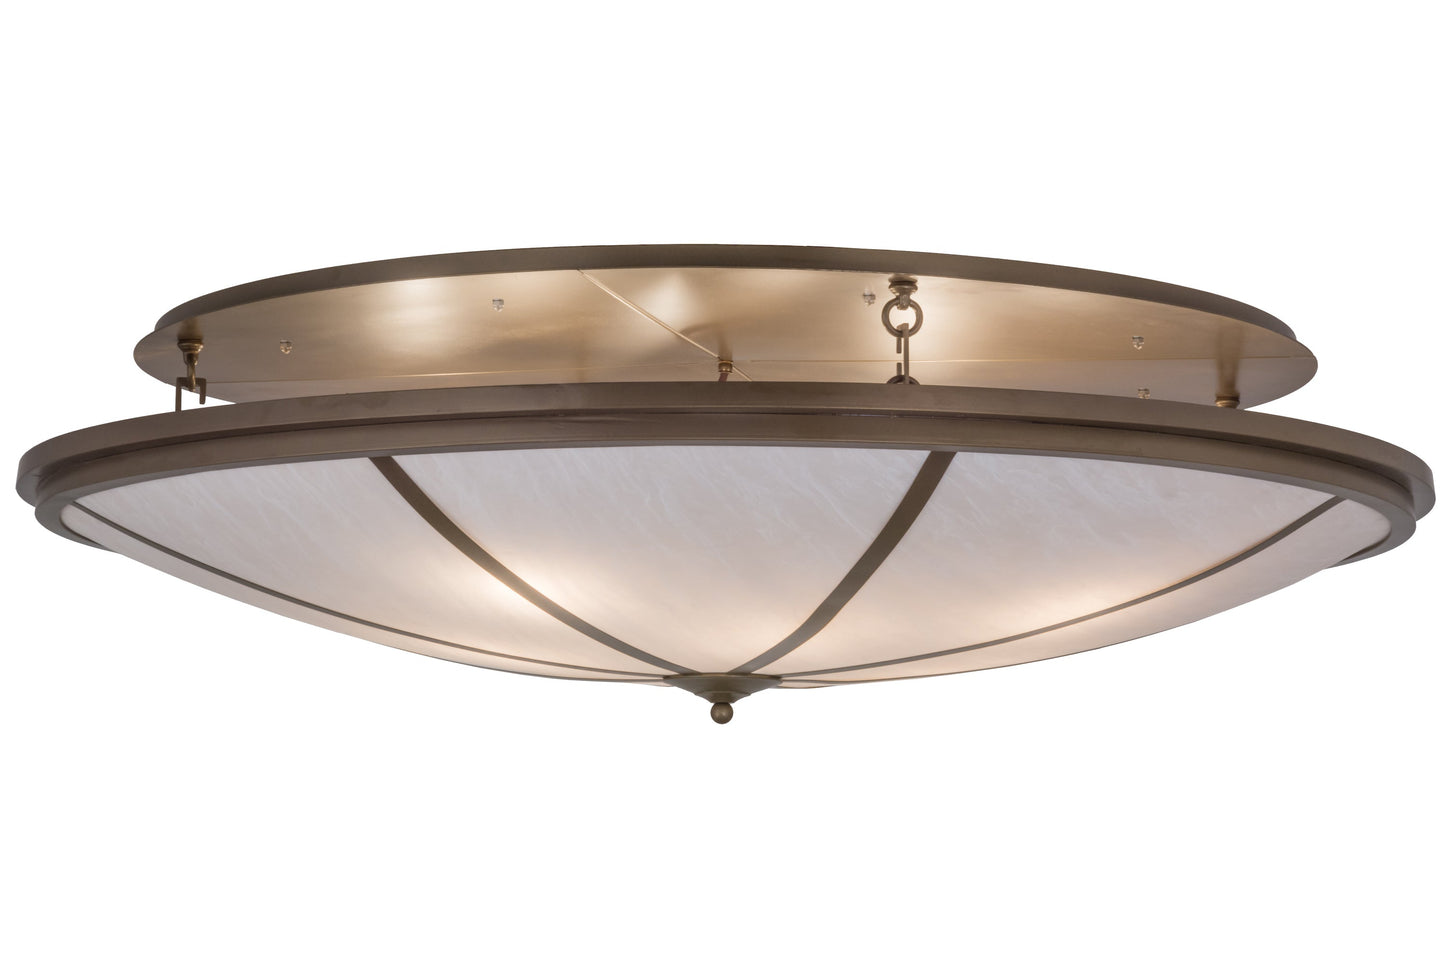 60" Commerce Flushmount by 2nd Ave Lighting